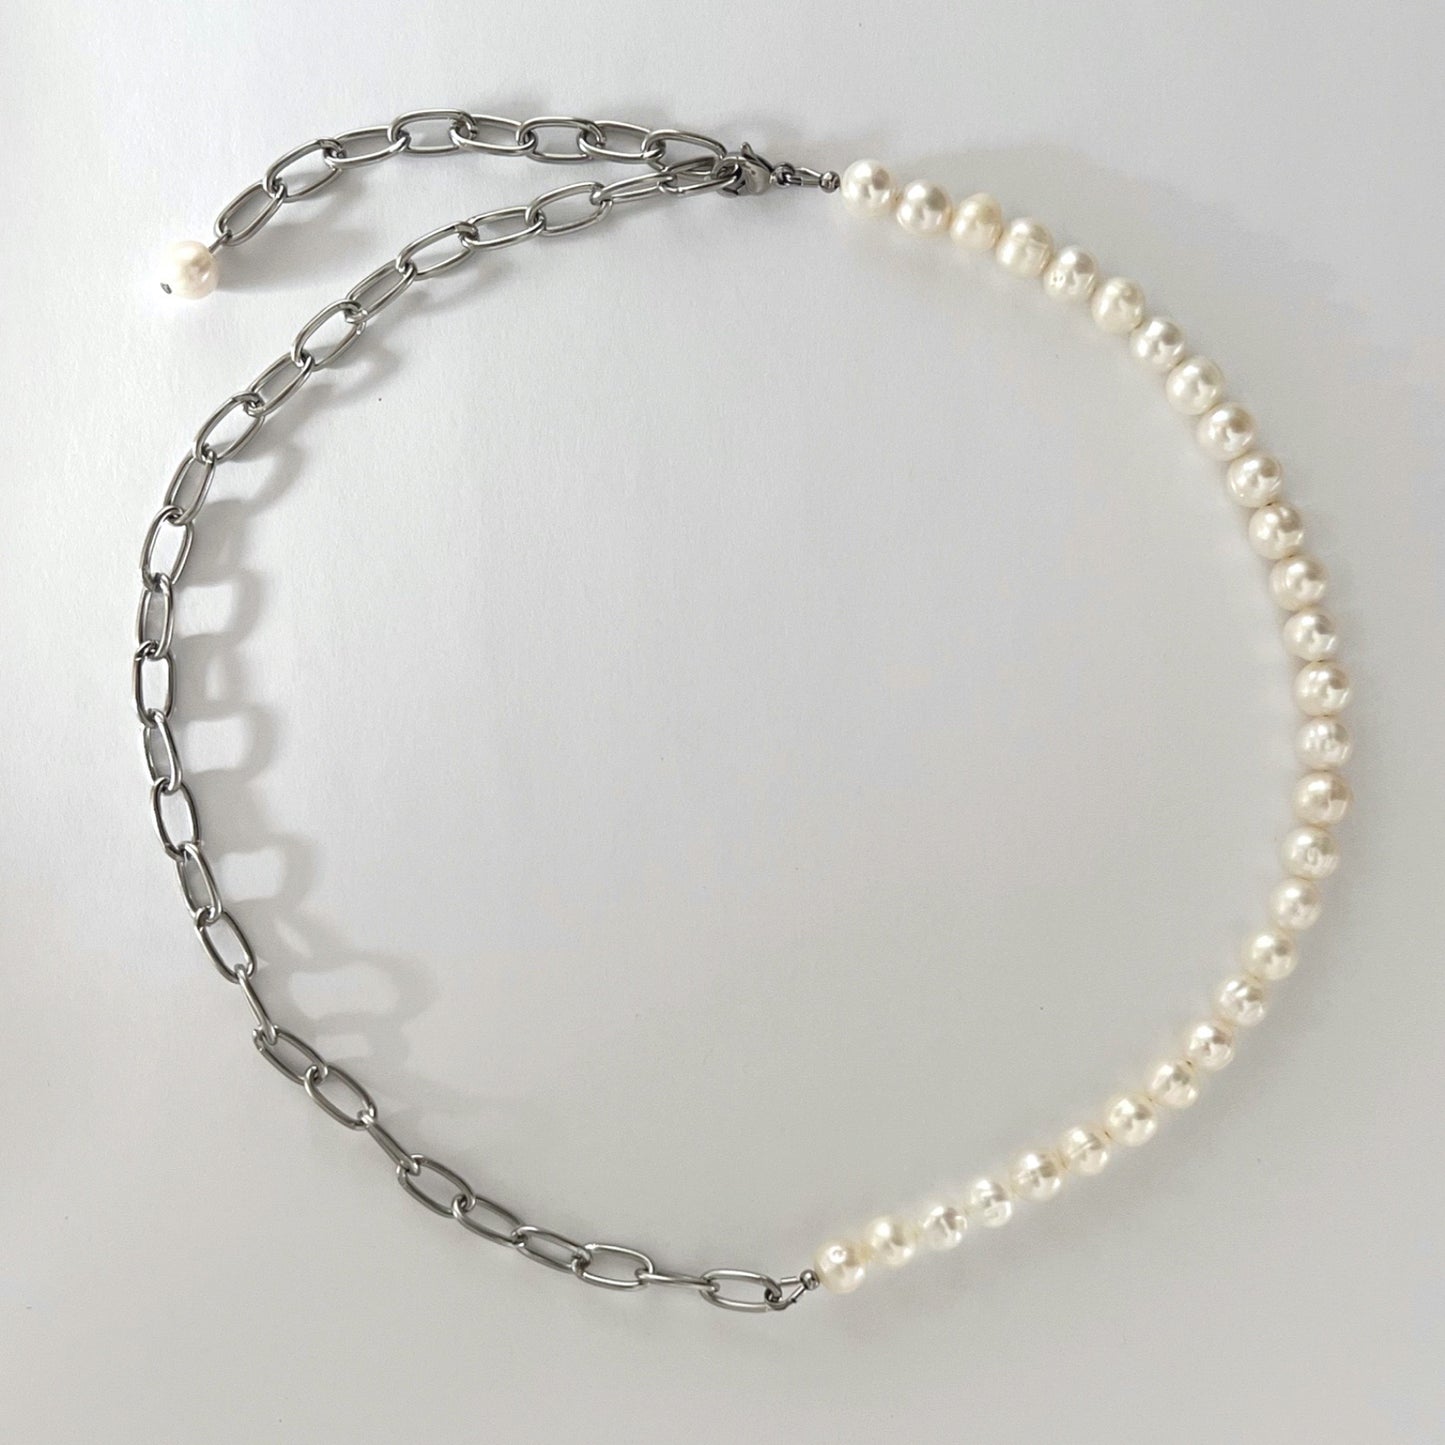 Margarite Necklace - Silver